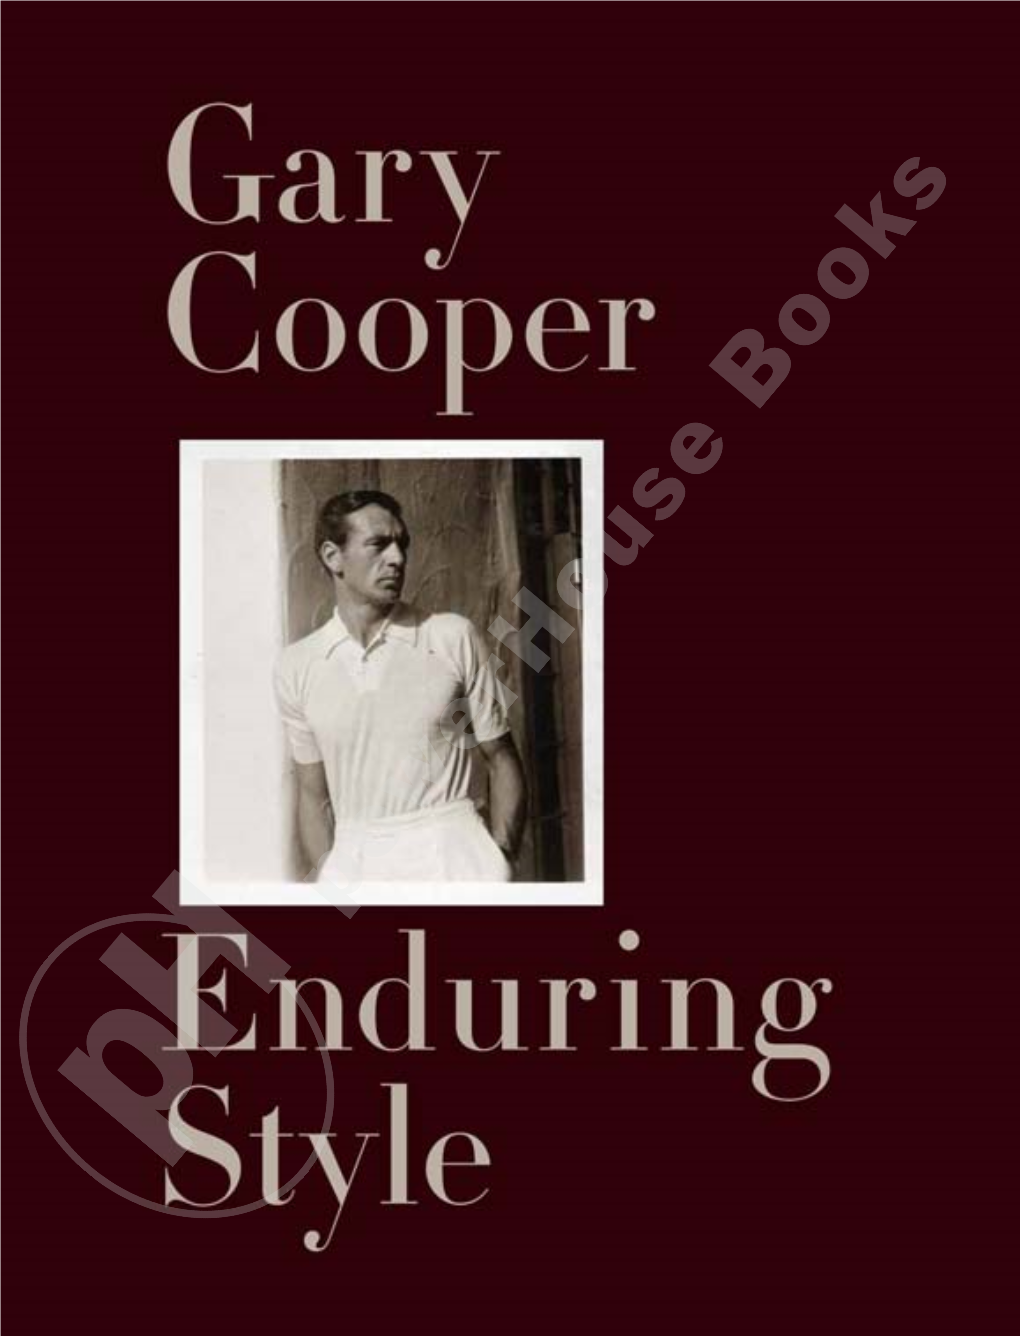 GARY COOPER: Enduring Style